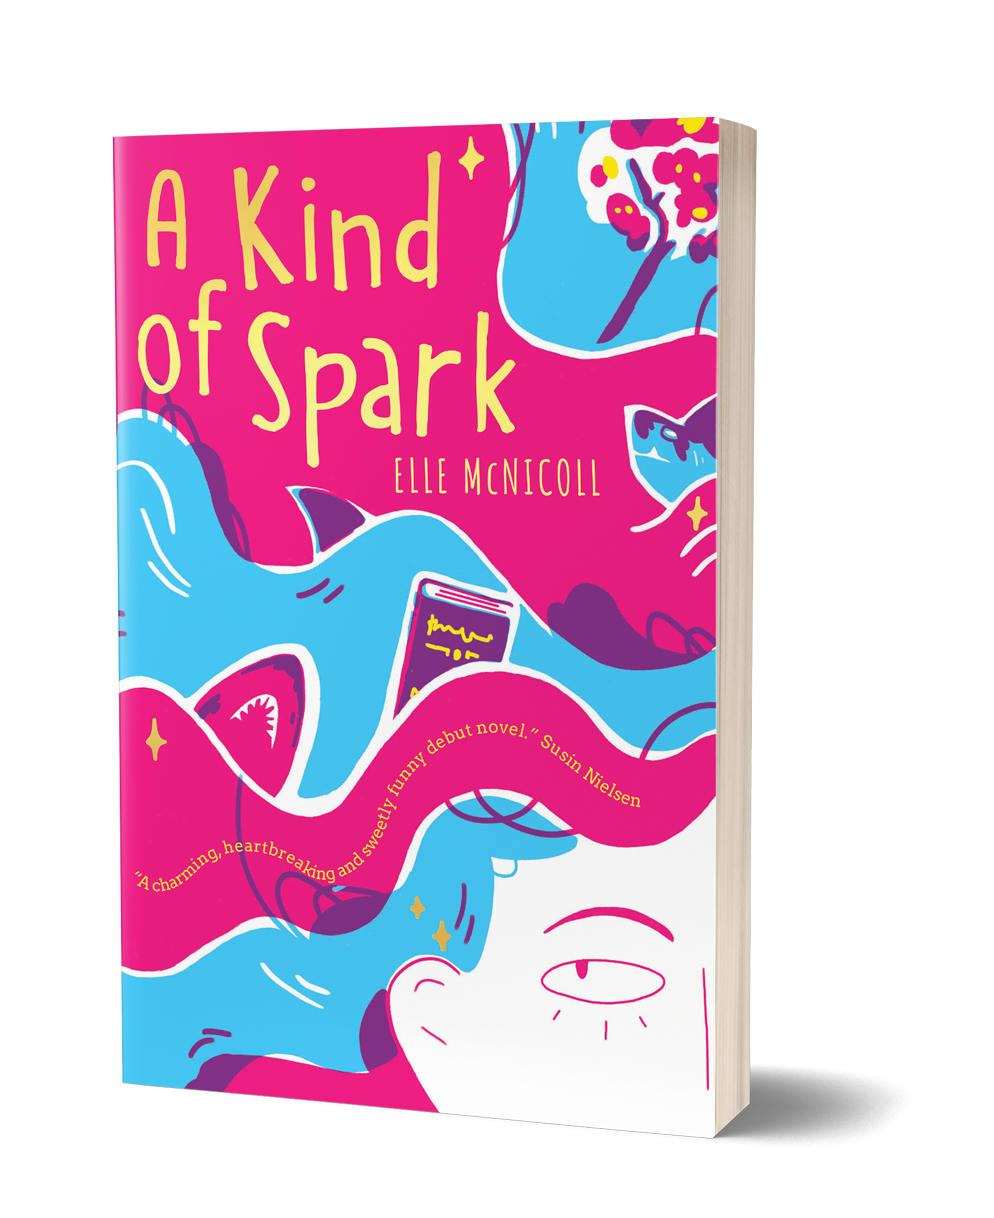 The Salon, Jan 2022: ‘A Kind of Spark’ by Elle McNicoll